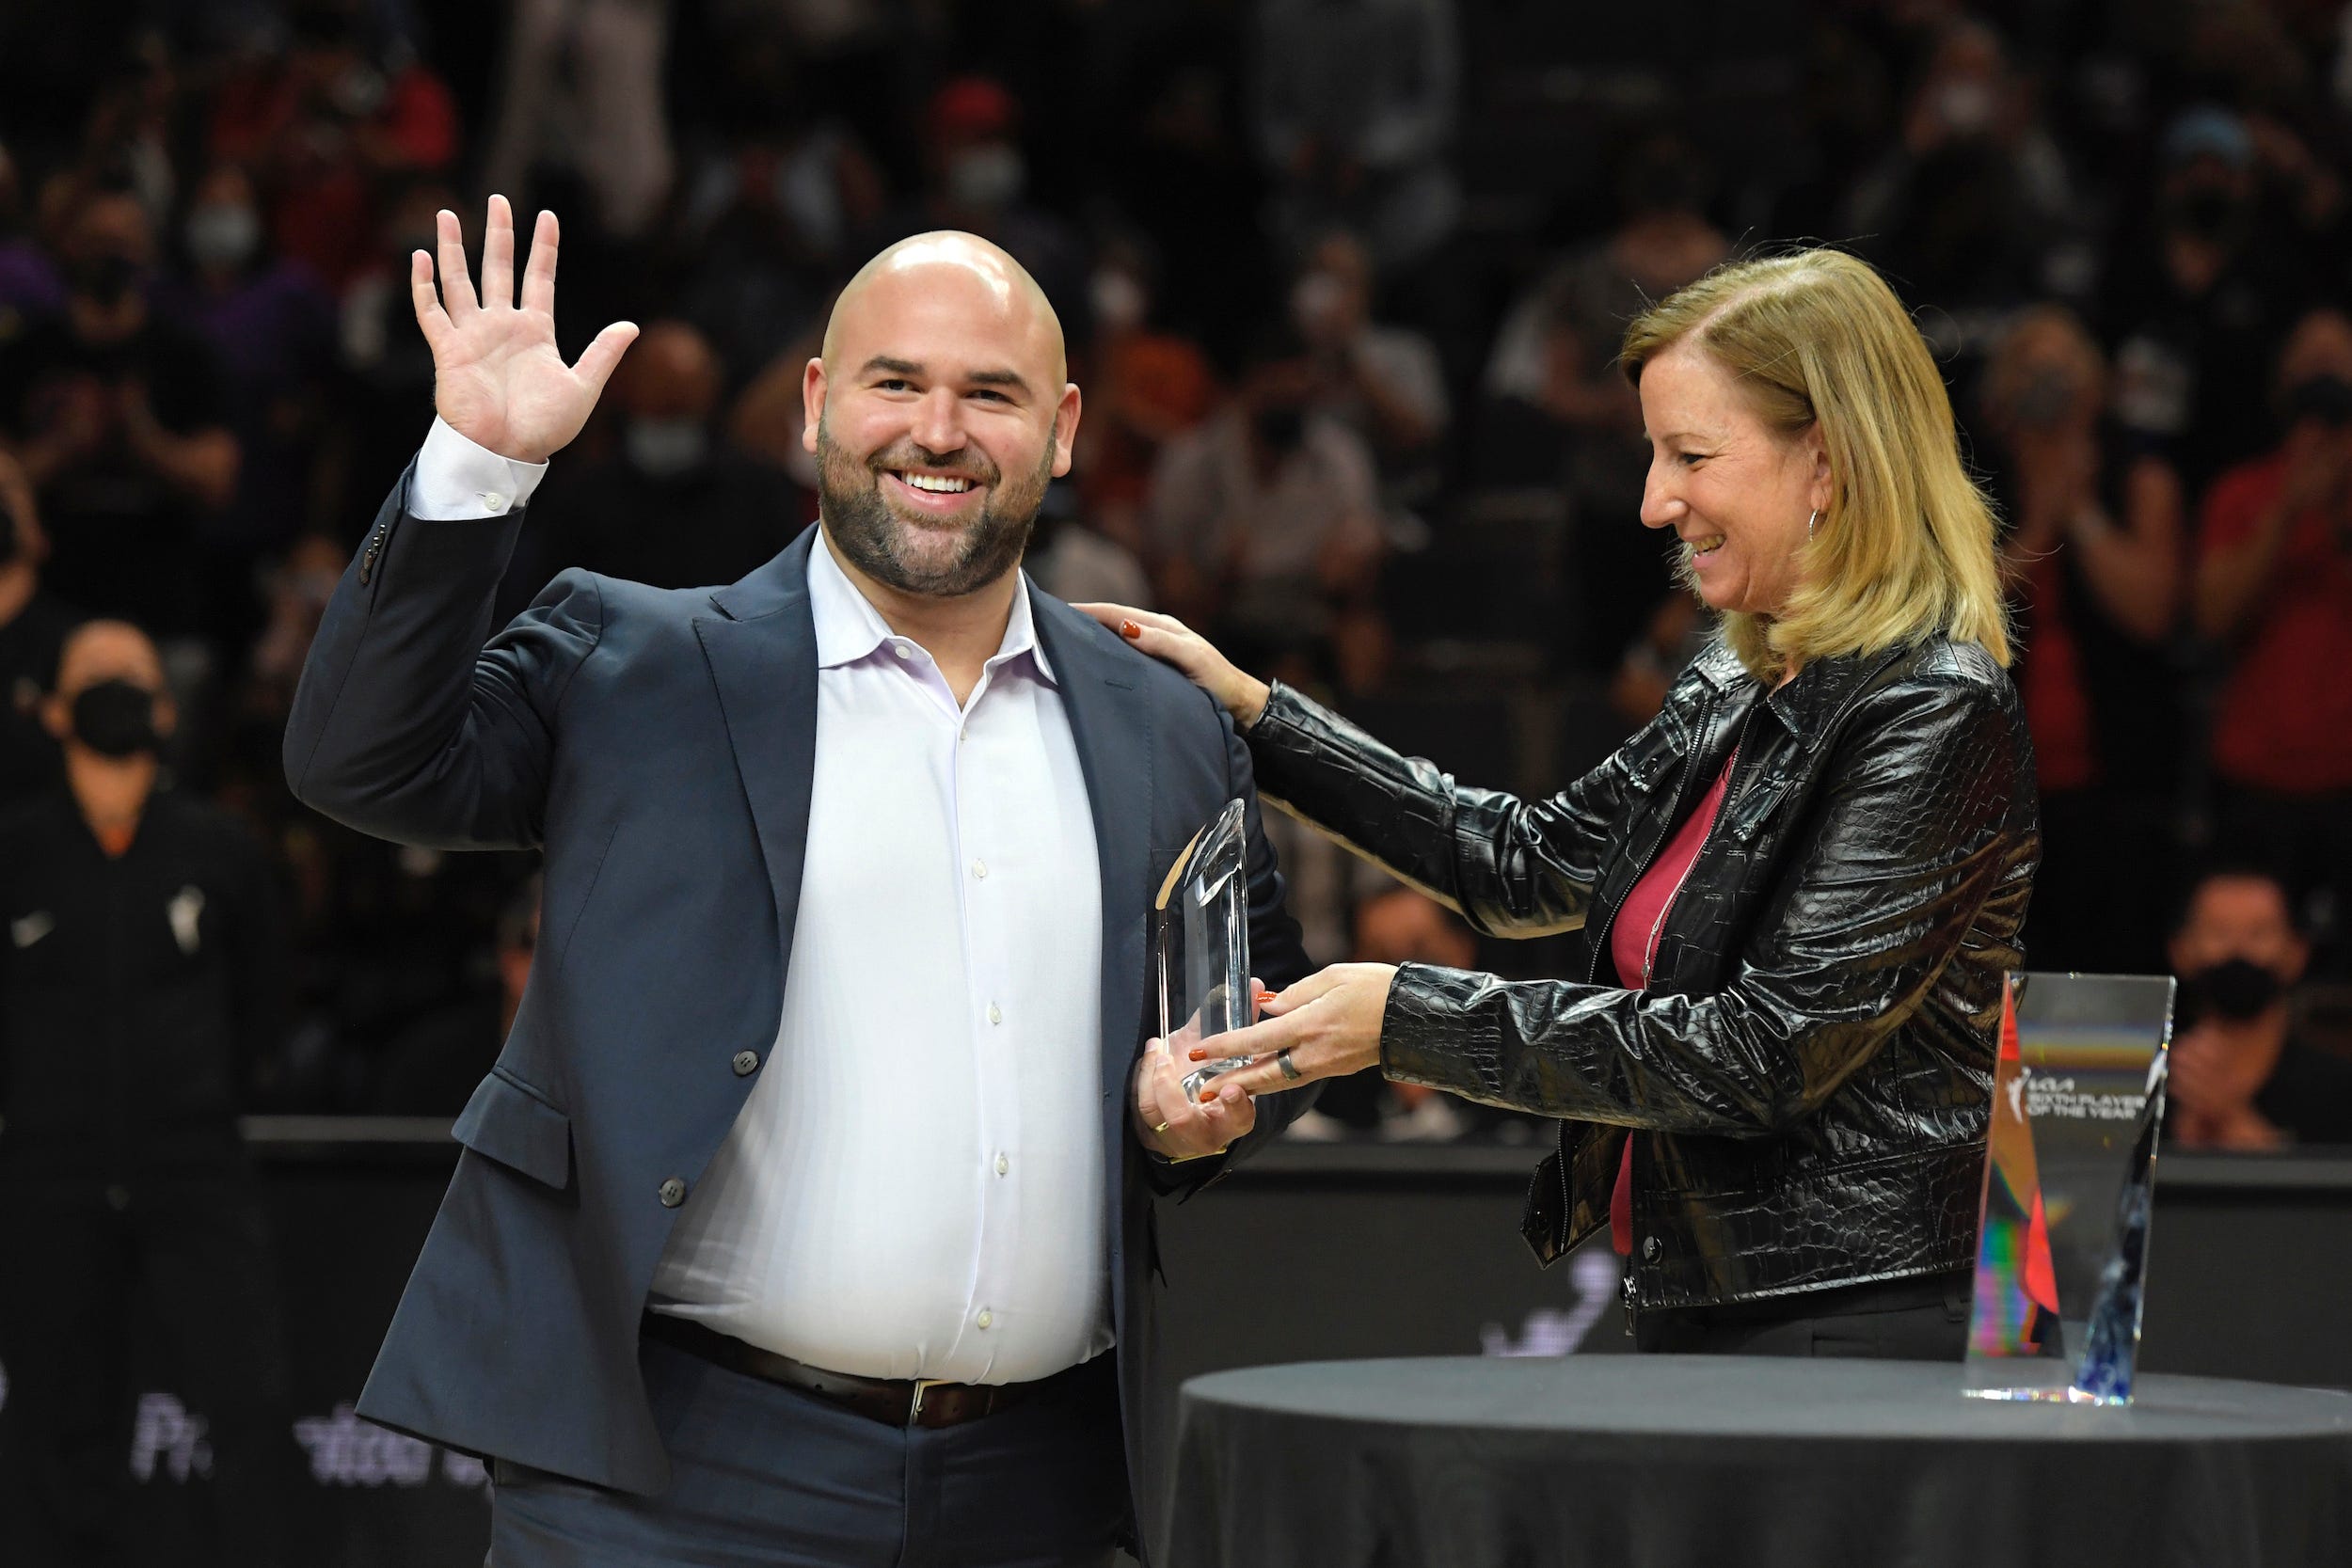 Dan Padover receives his trophy for 2021 WNBA Basketball Executive of the Year from WNBA Commissioner Cathy Engelbert.